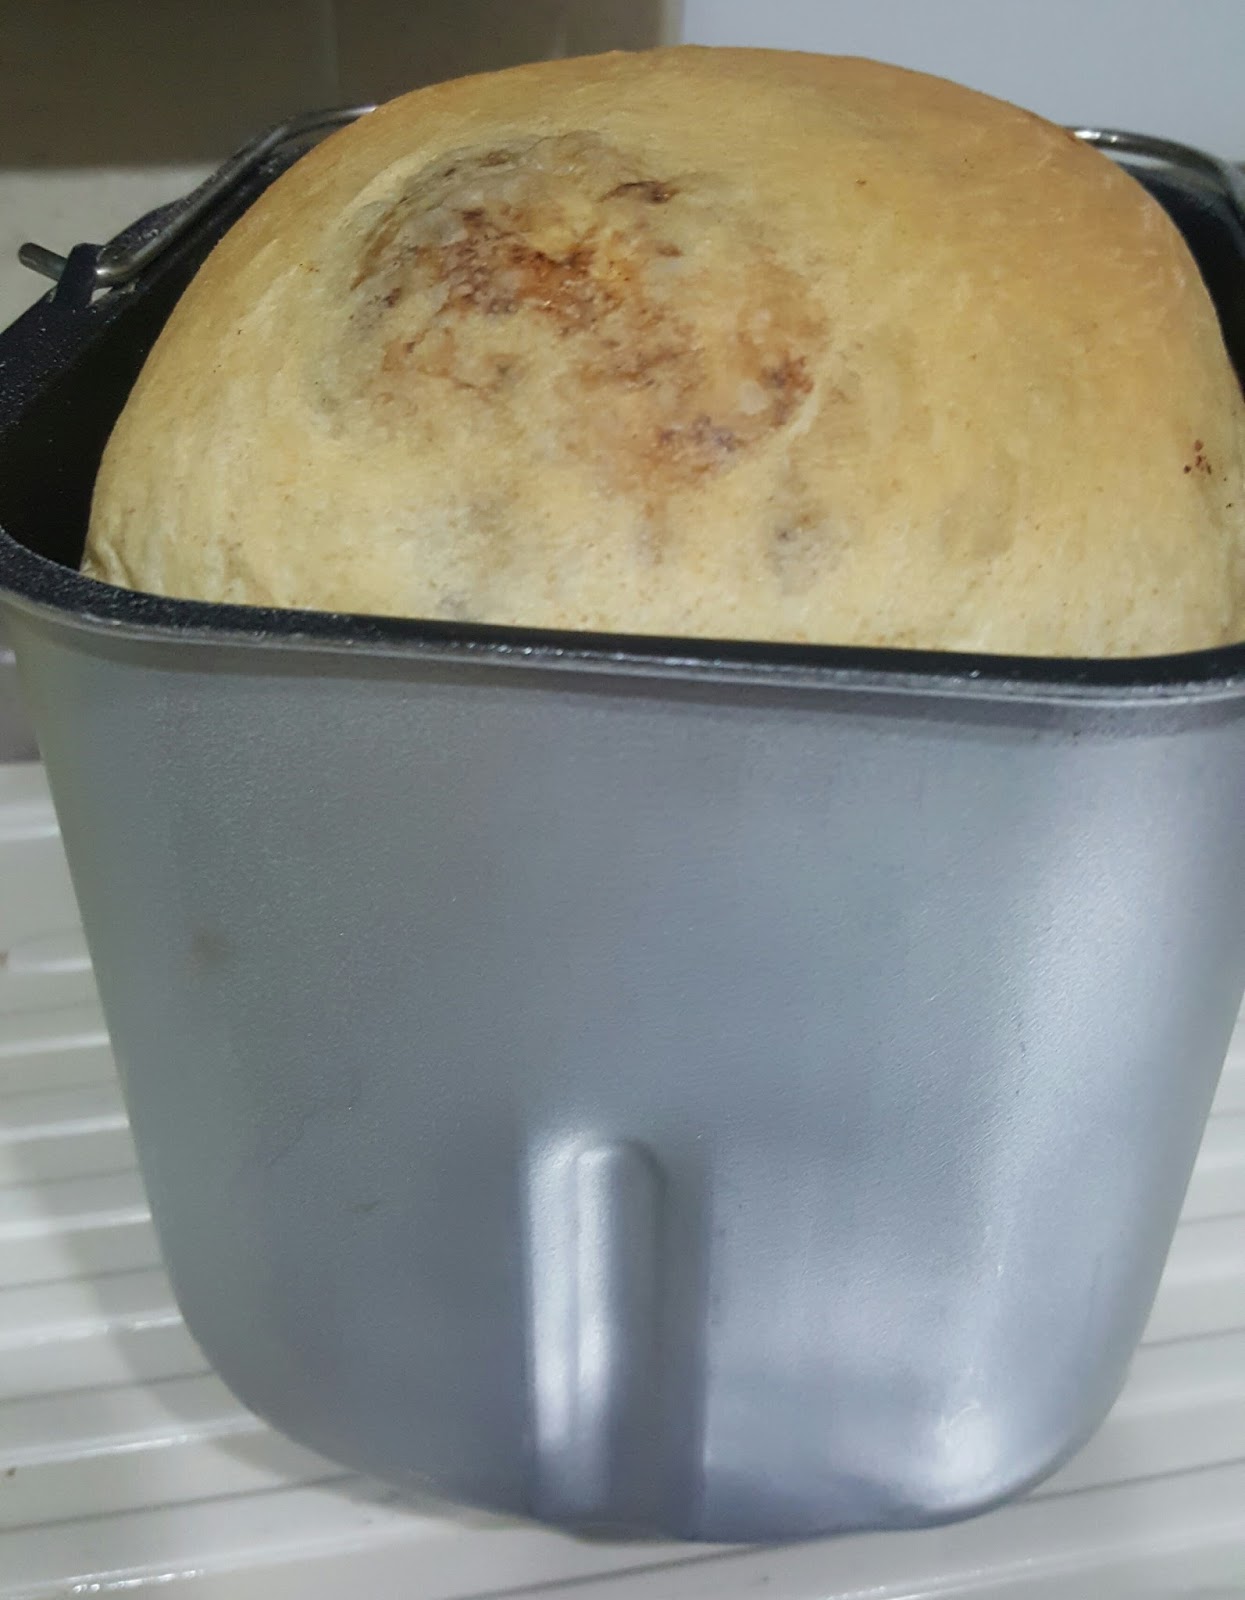 Catherine's Cooking @ cathteops: Cinnamon Bread by Bread Maker